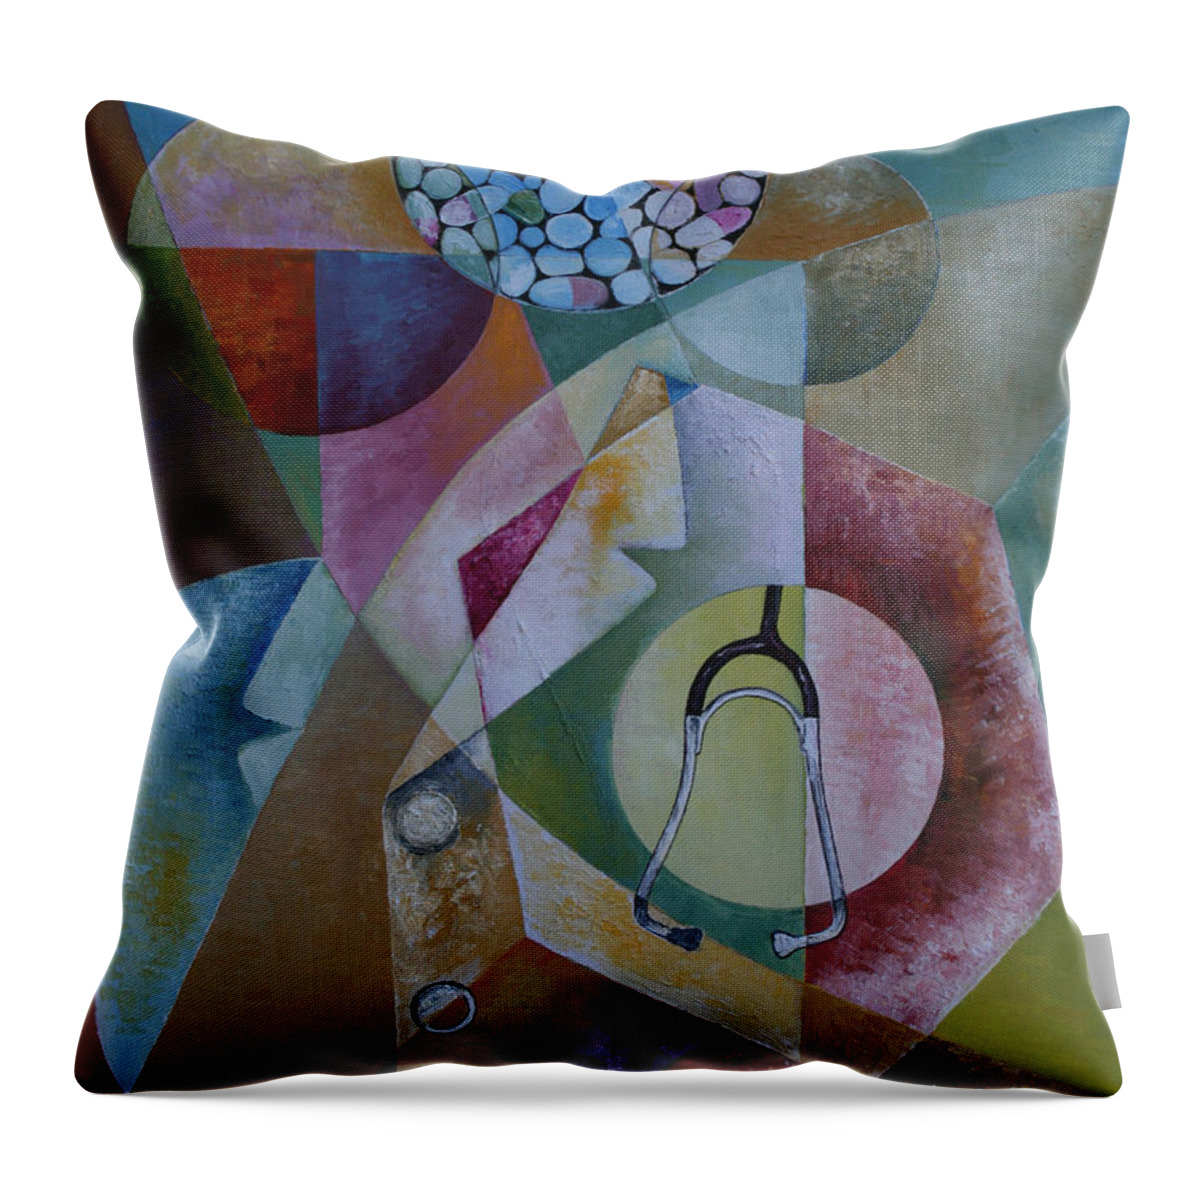 The Art Of Pharmacotherapy Throw Pillow featuring the painting The Art of Pharmacotherapy by Obi-Tabot Tabe